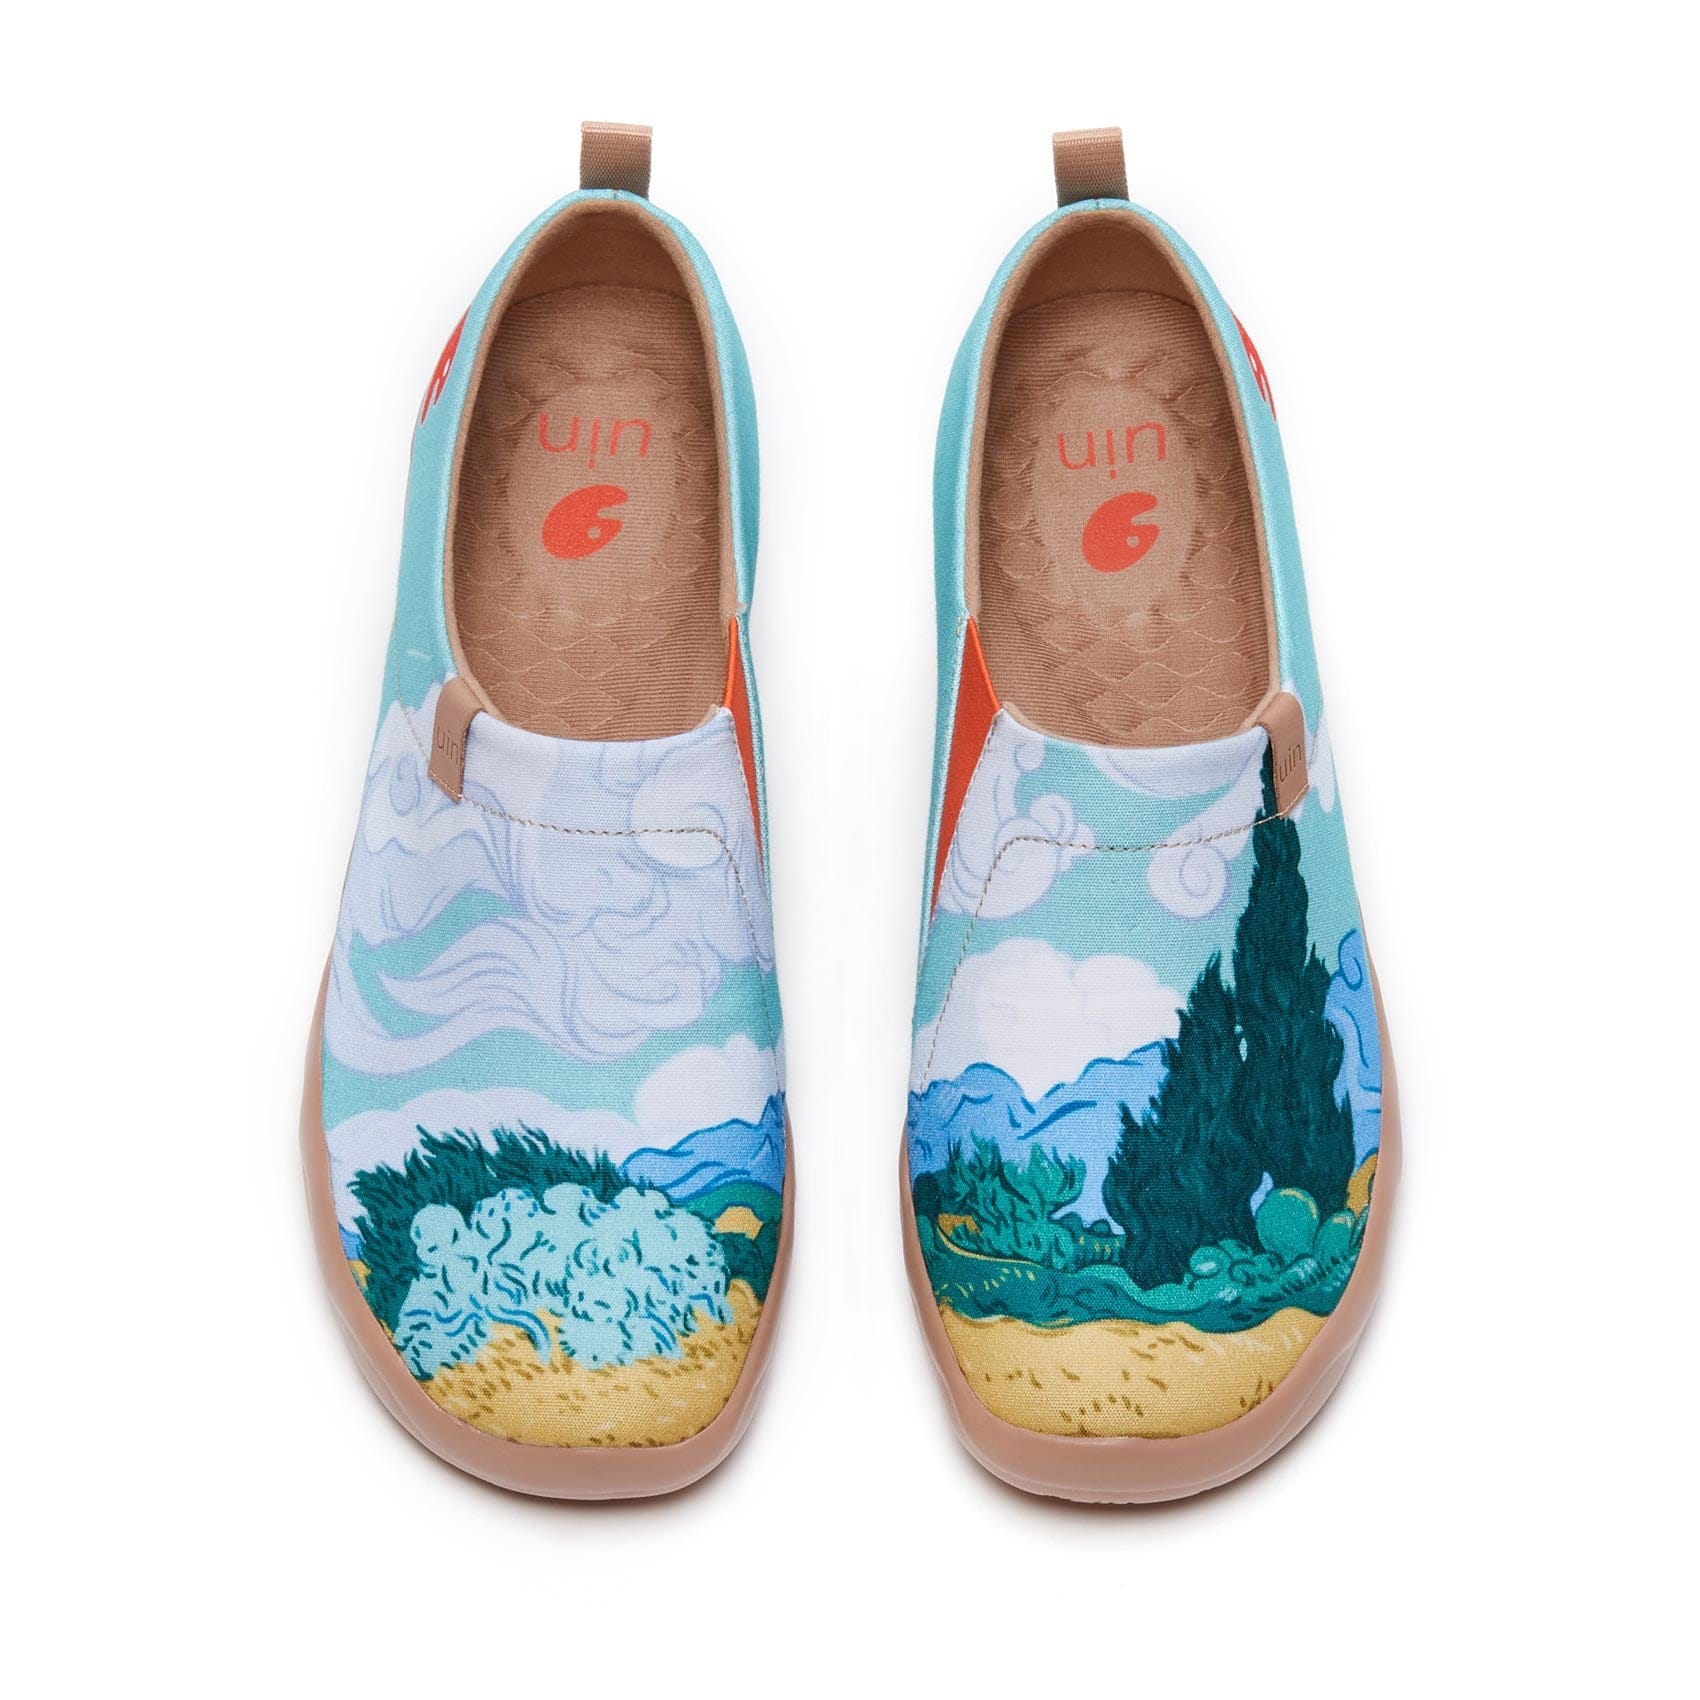 Van Gogh Wheatfield with Cypresses Men Art Painted Canvas Shoes | UIN ...